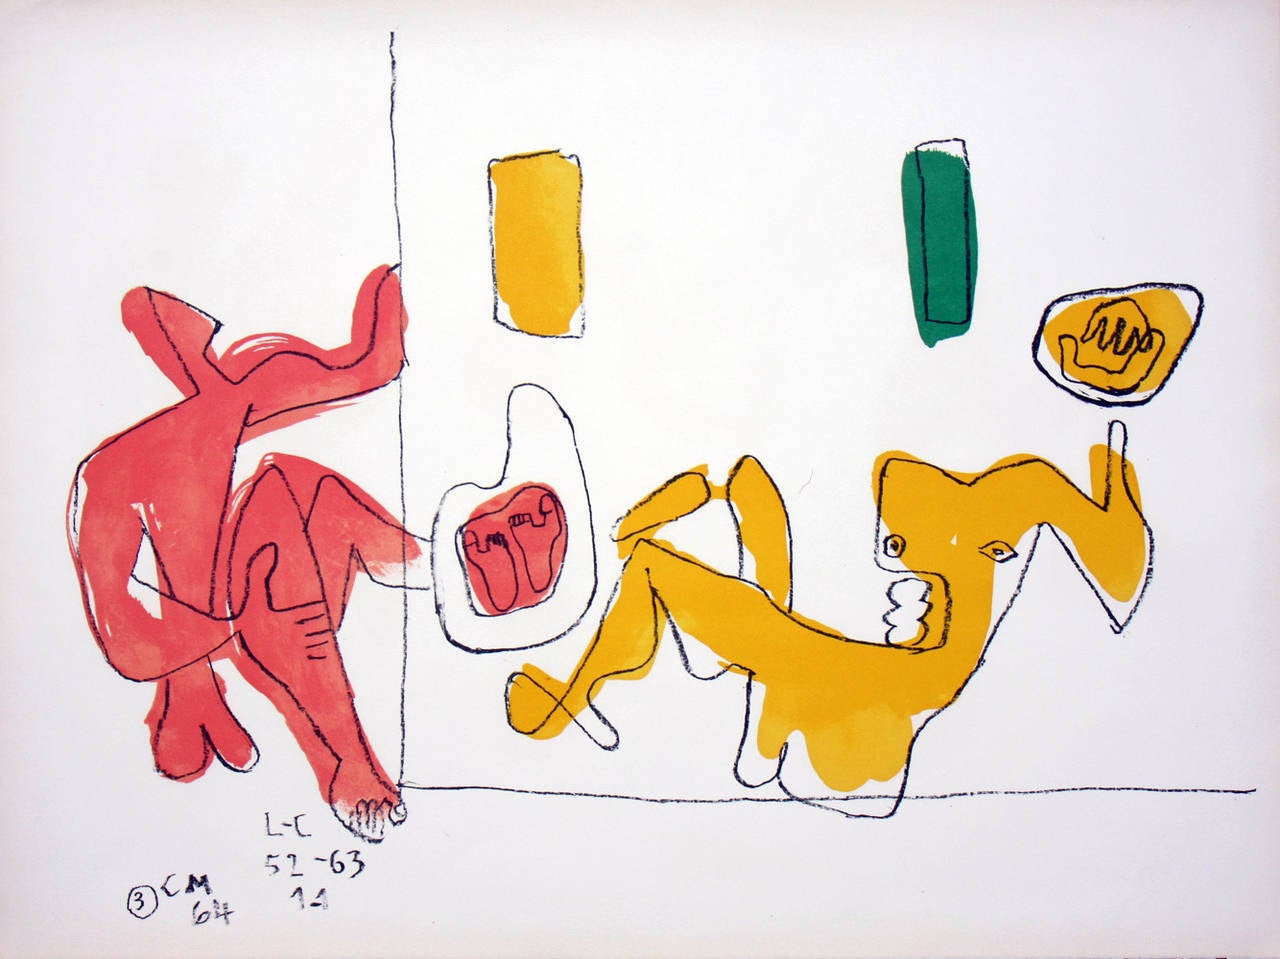 Le Corbusier Abstract Print - Touching Their Feet